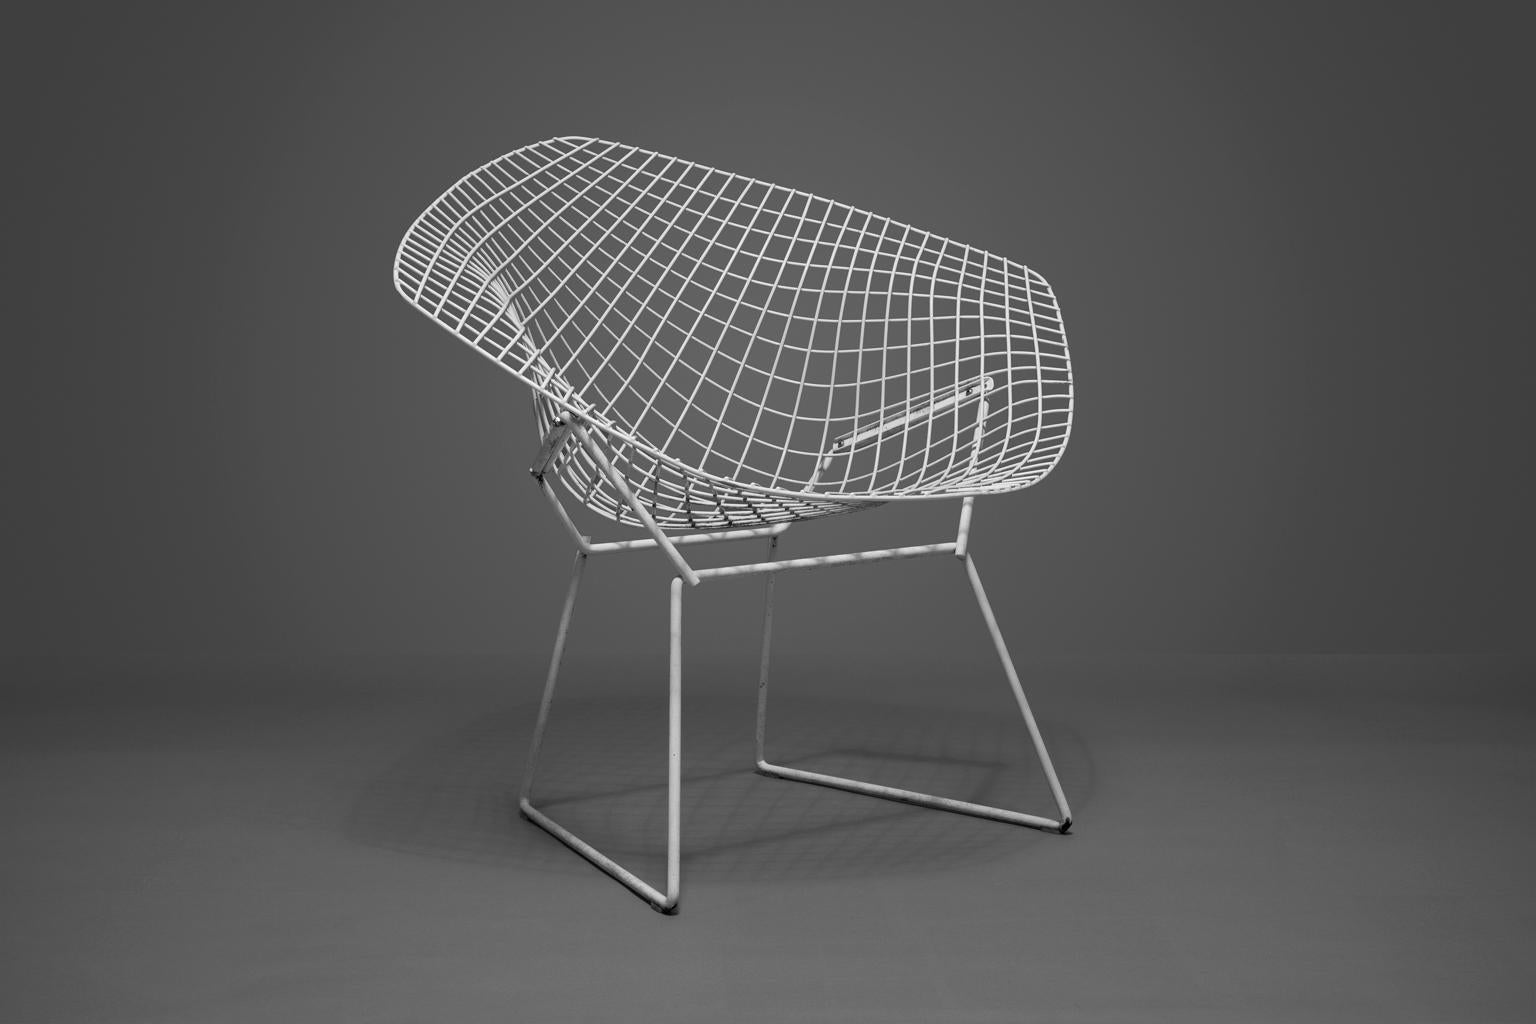 SALE ONE WEEK ONLY

Bertoia Diamond Chairs, White, Set of Two, Welded & Painted Steel. They are as elegant, strong and functional as when they were manufactured. The chairs will add a touch of class to any setting.

Harry Bertoia's career began in